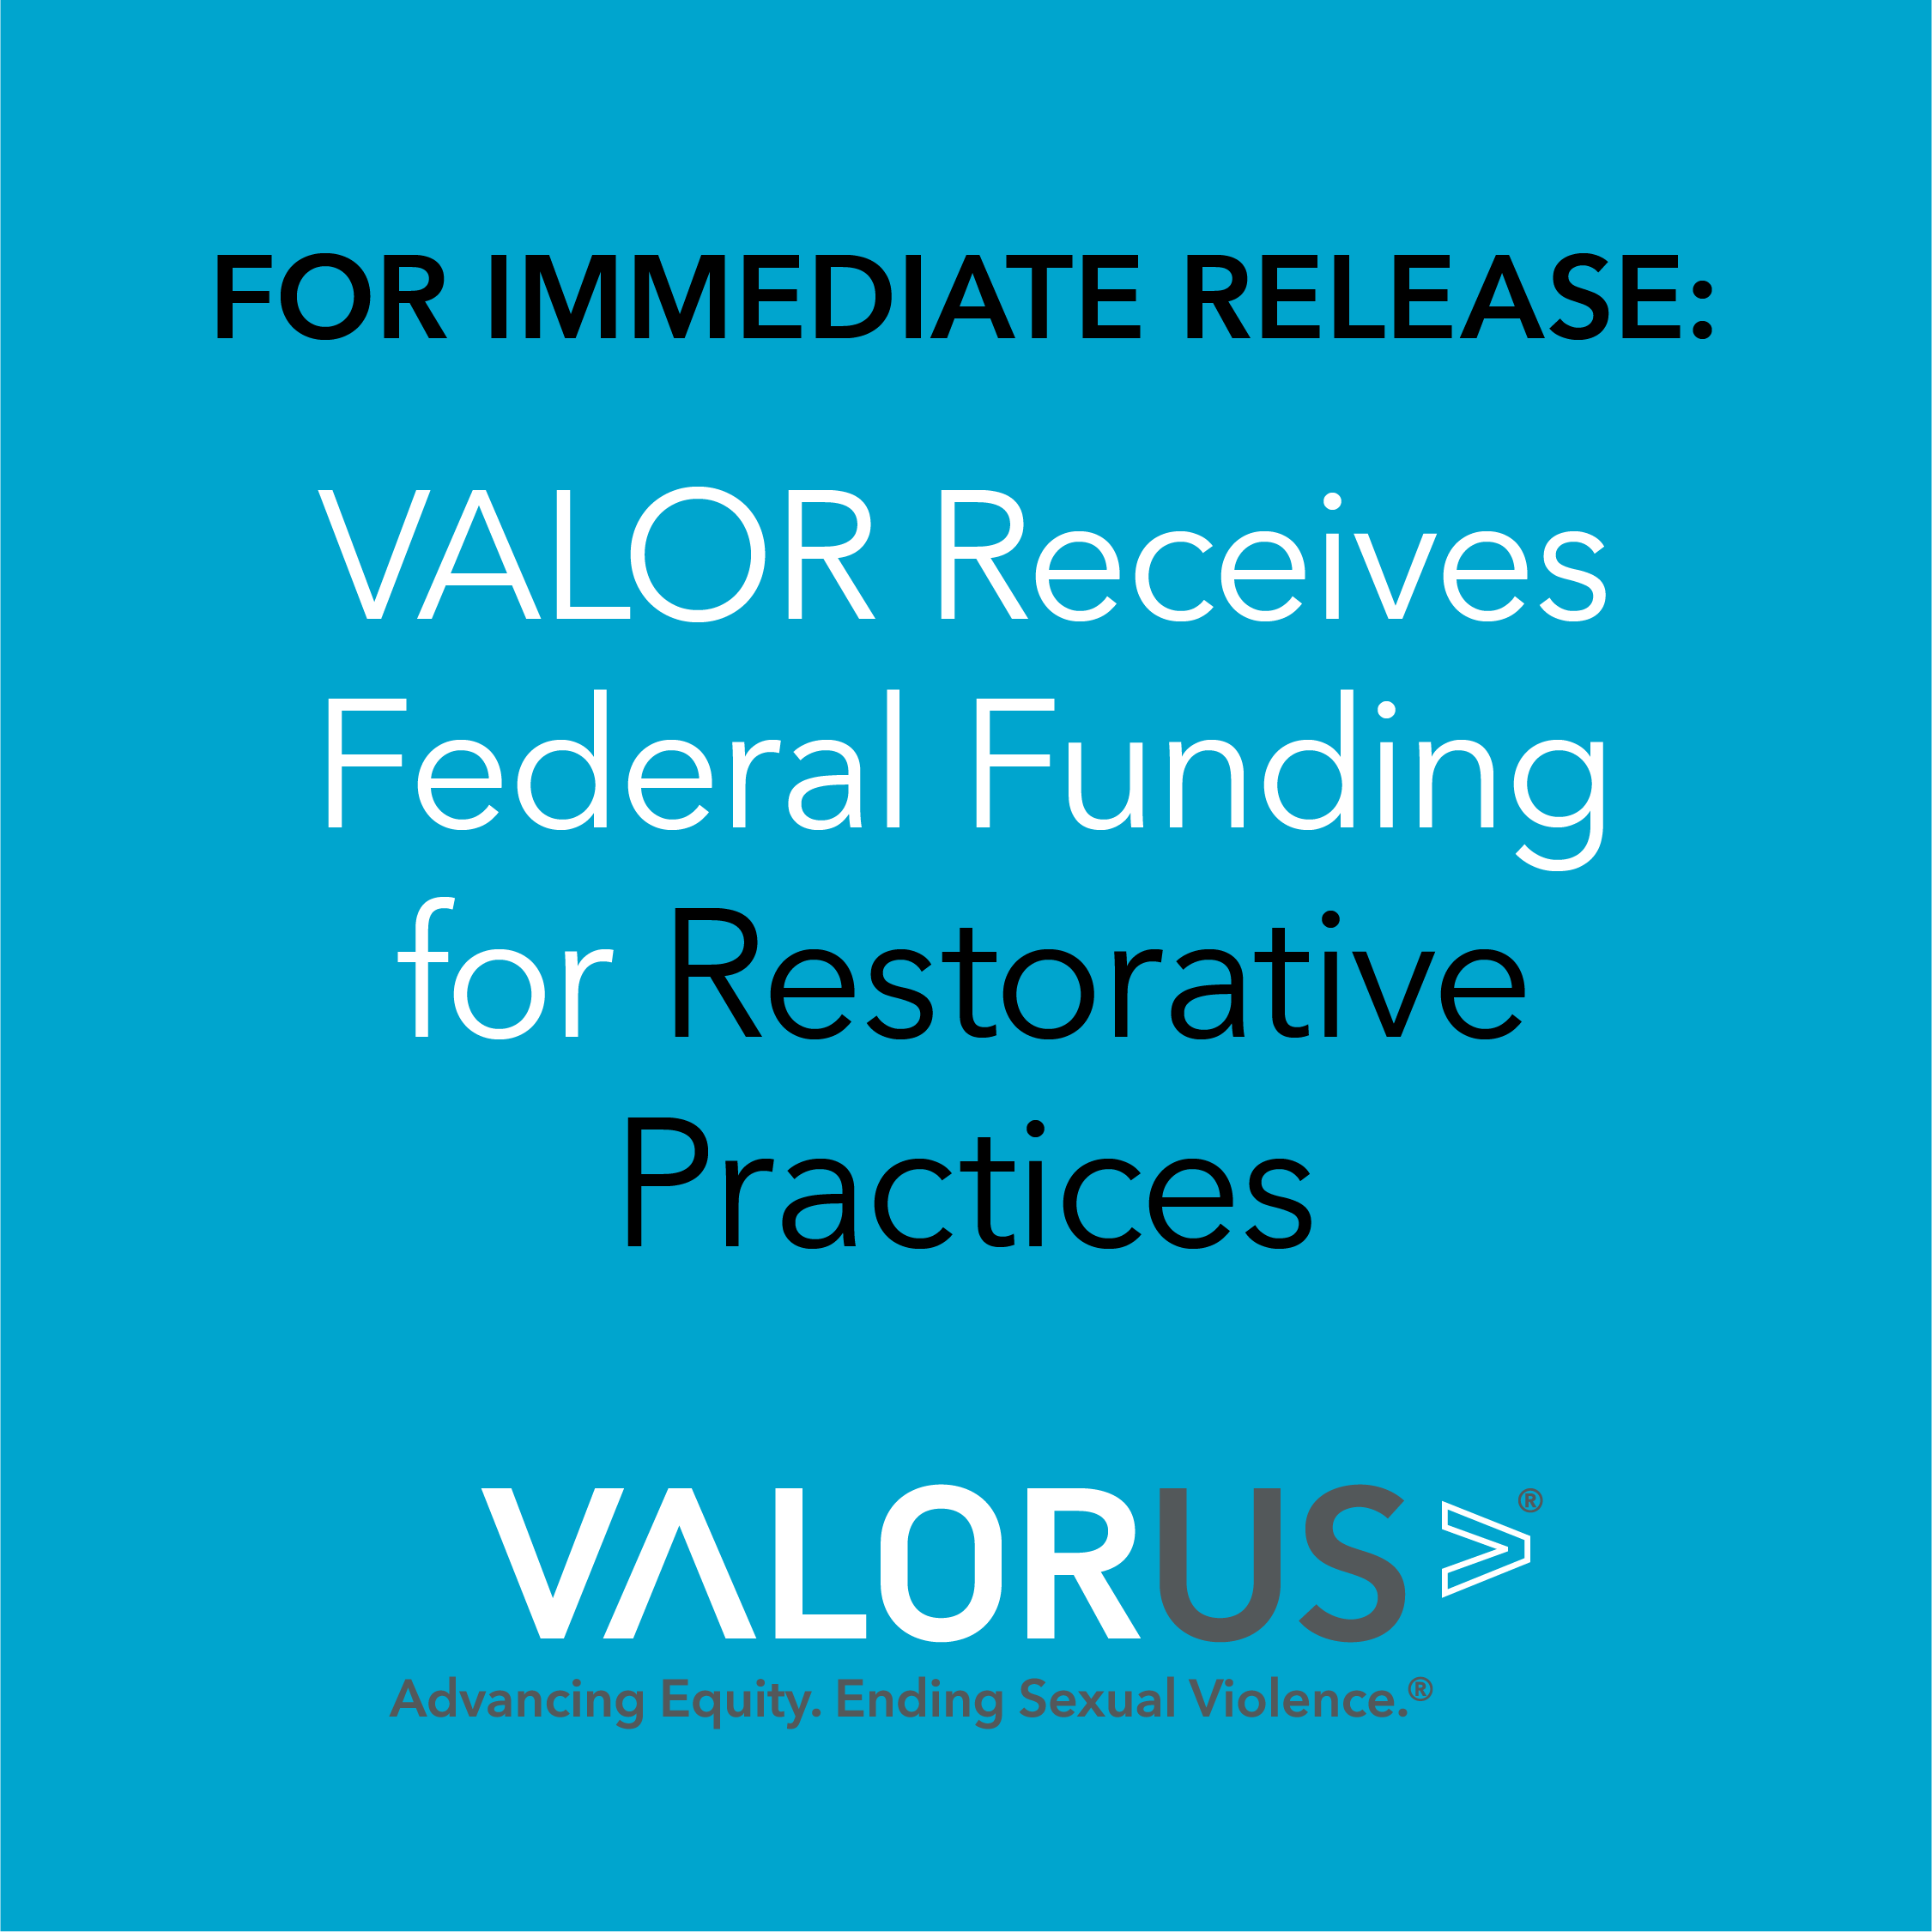 For immediate release: VALOR receives federal funding for restorative practices.